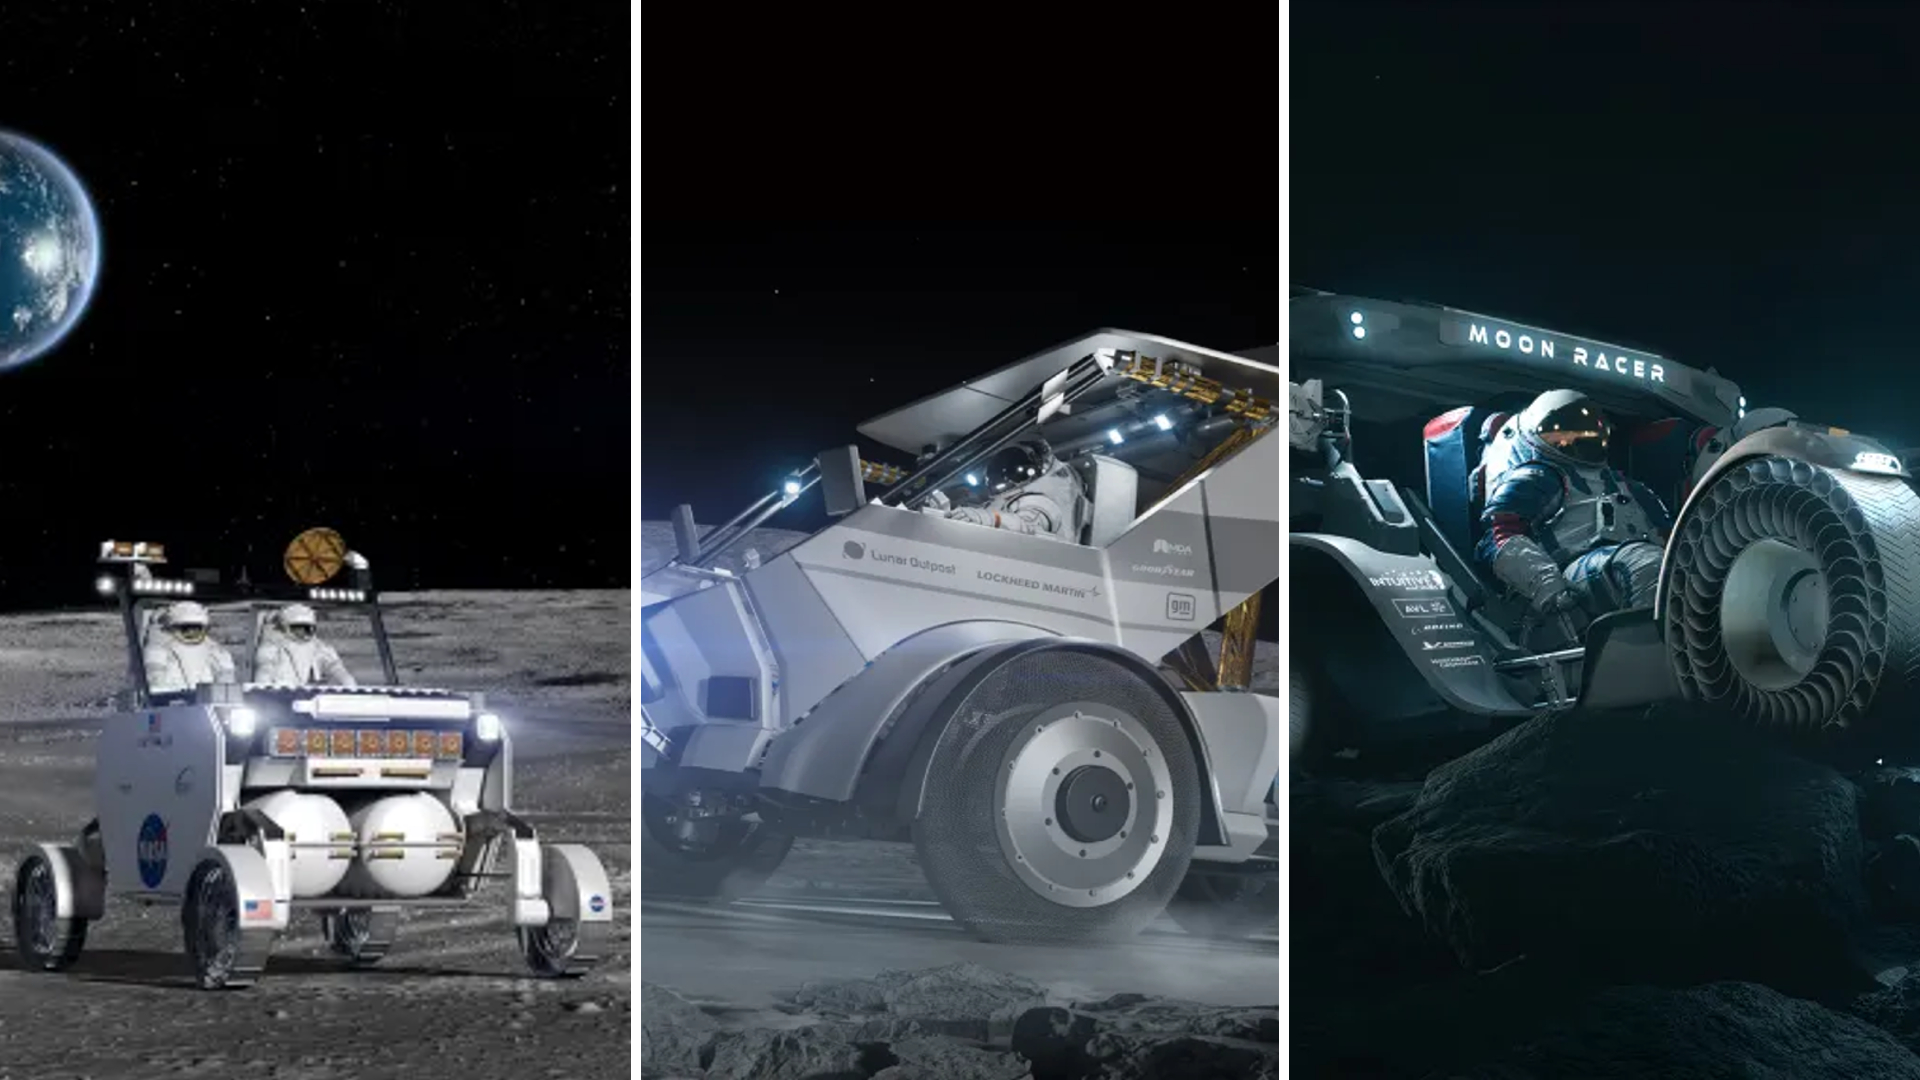 NASA picks 3 companies to design lunar rover for Artemis astronauts to drive on the moon Space